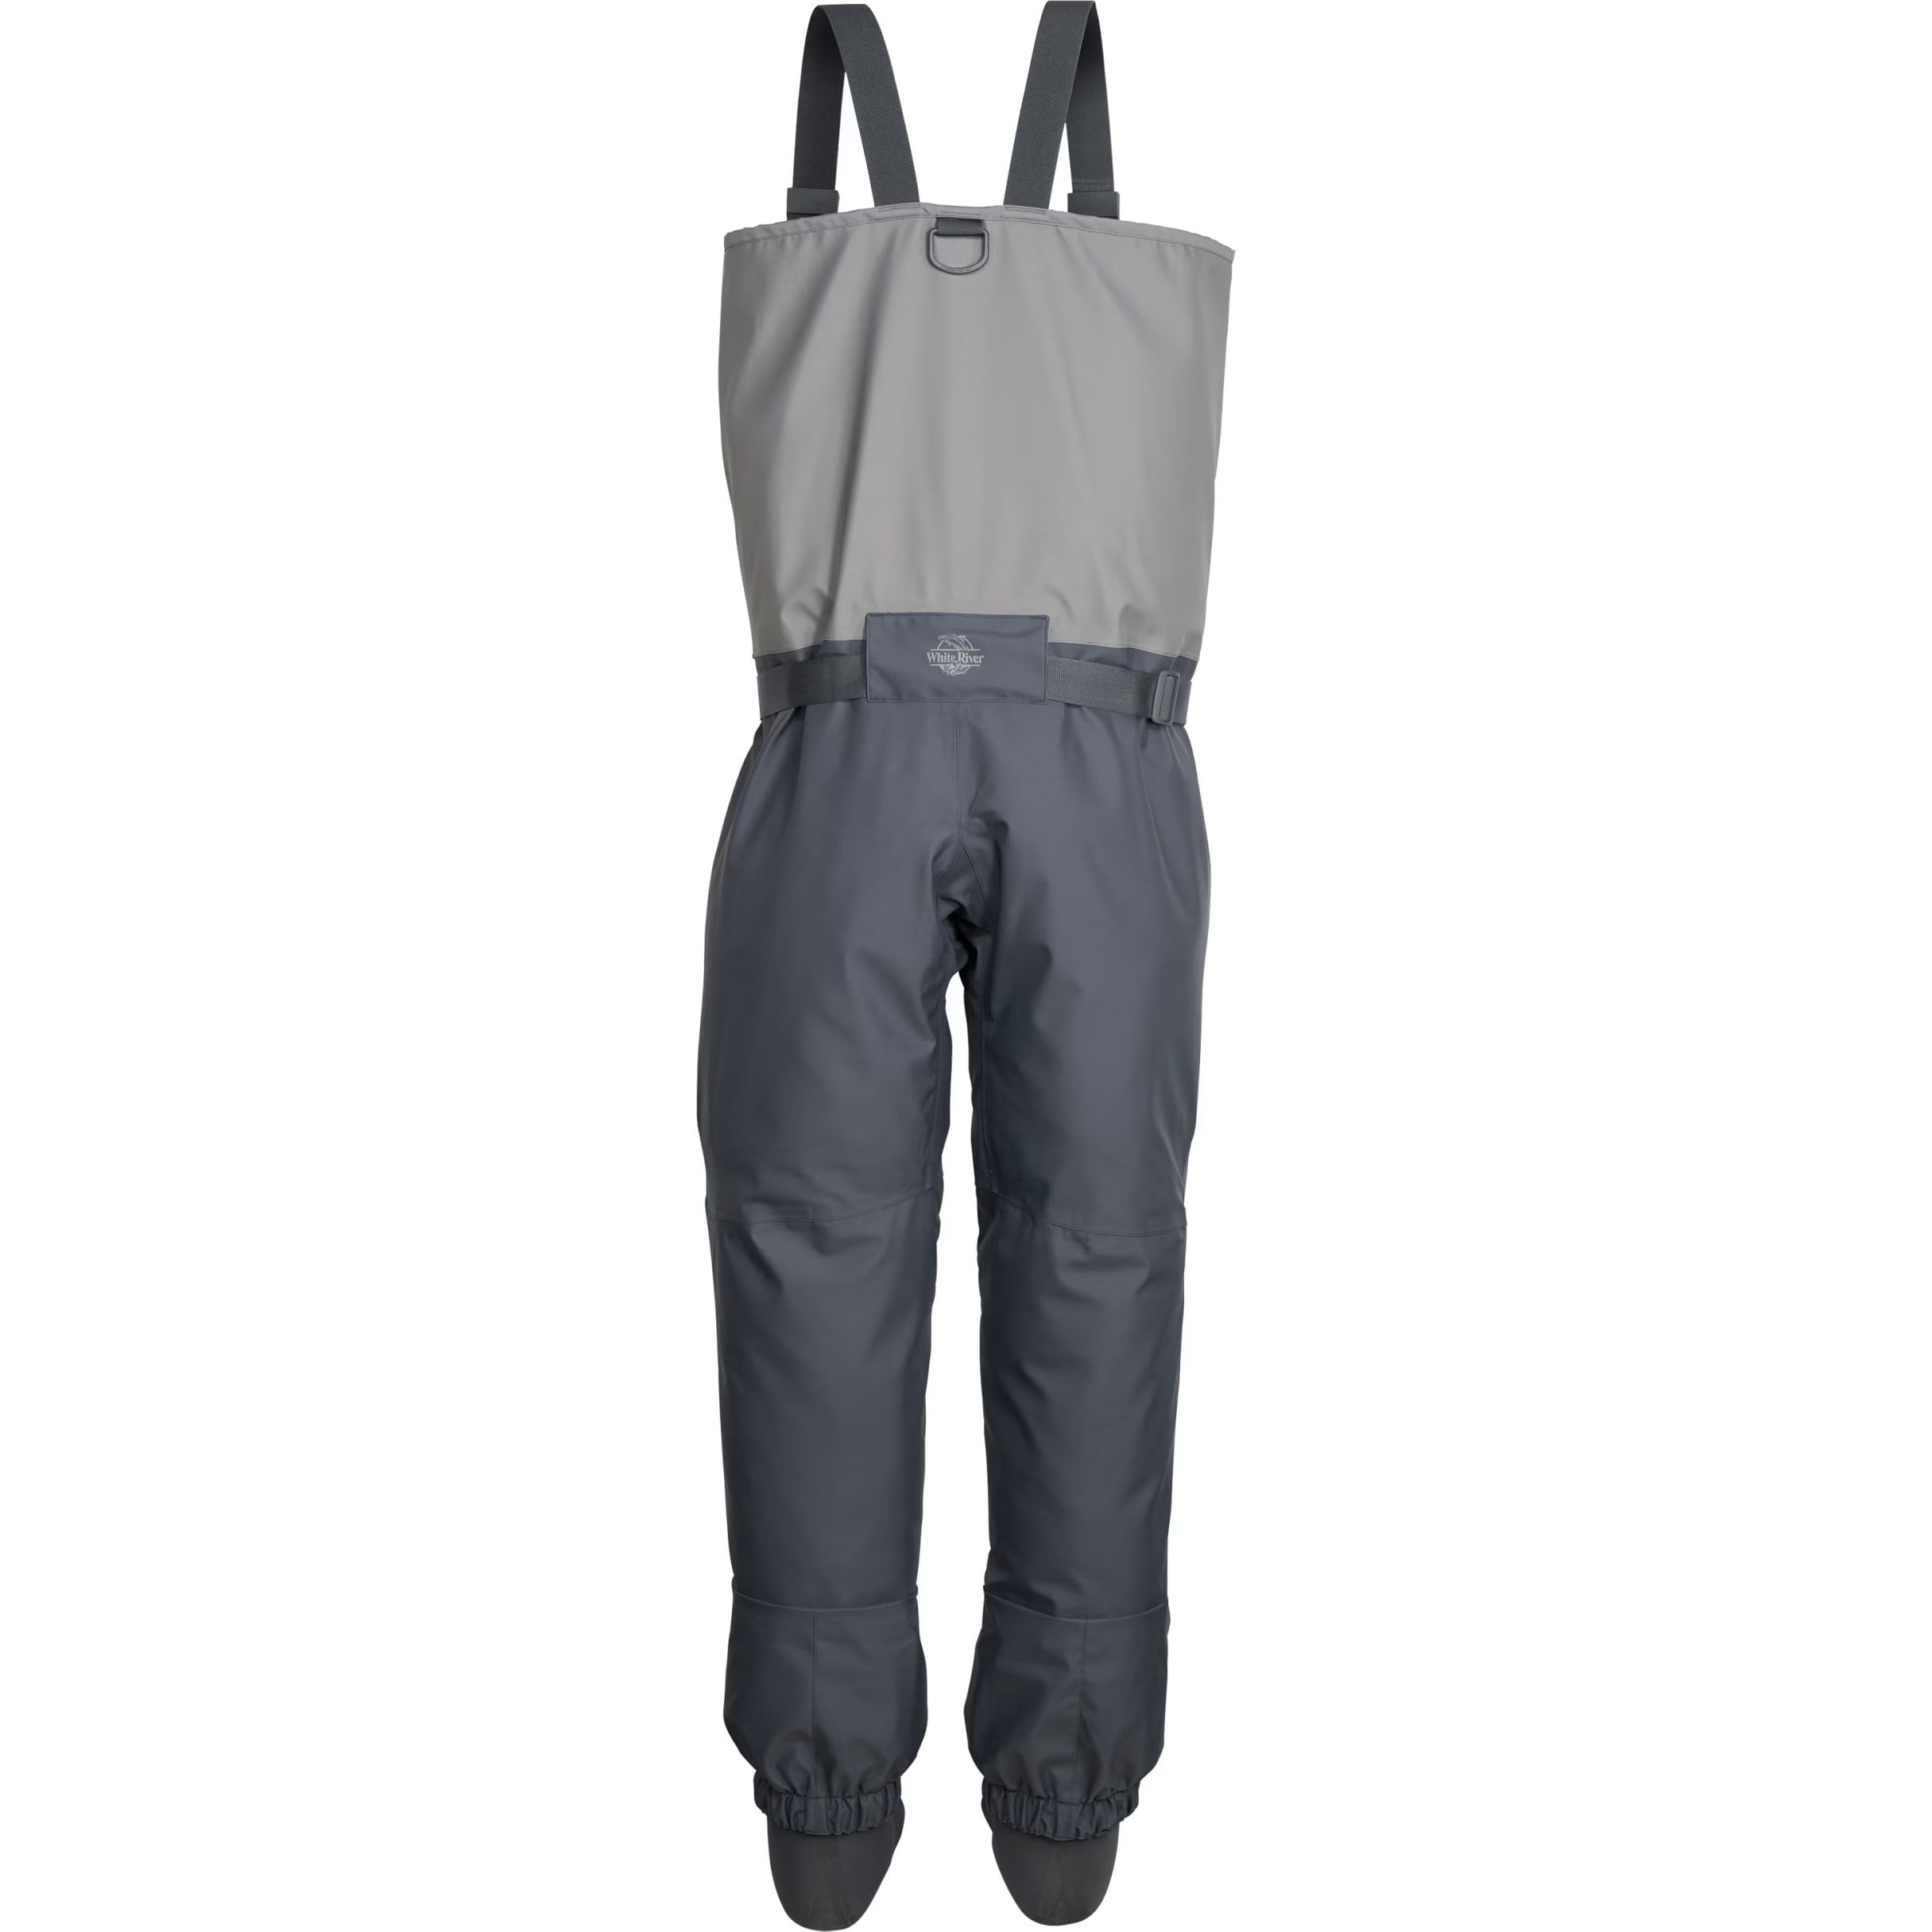 White River Fly Shop® Men’s Prestige Stocking-Foot Chest Waders